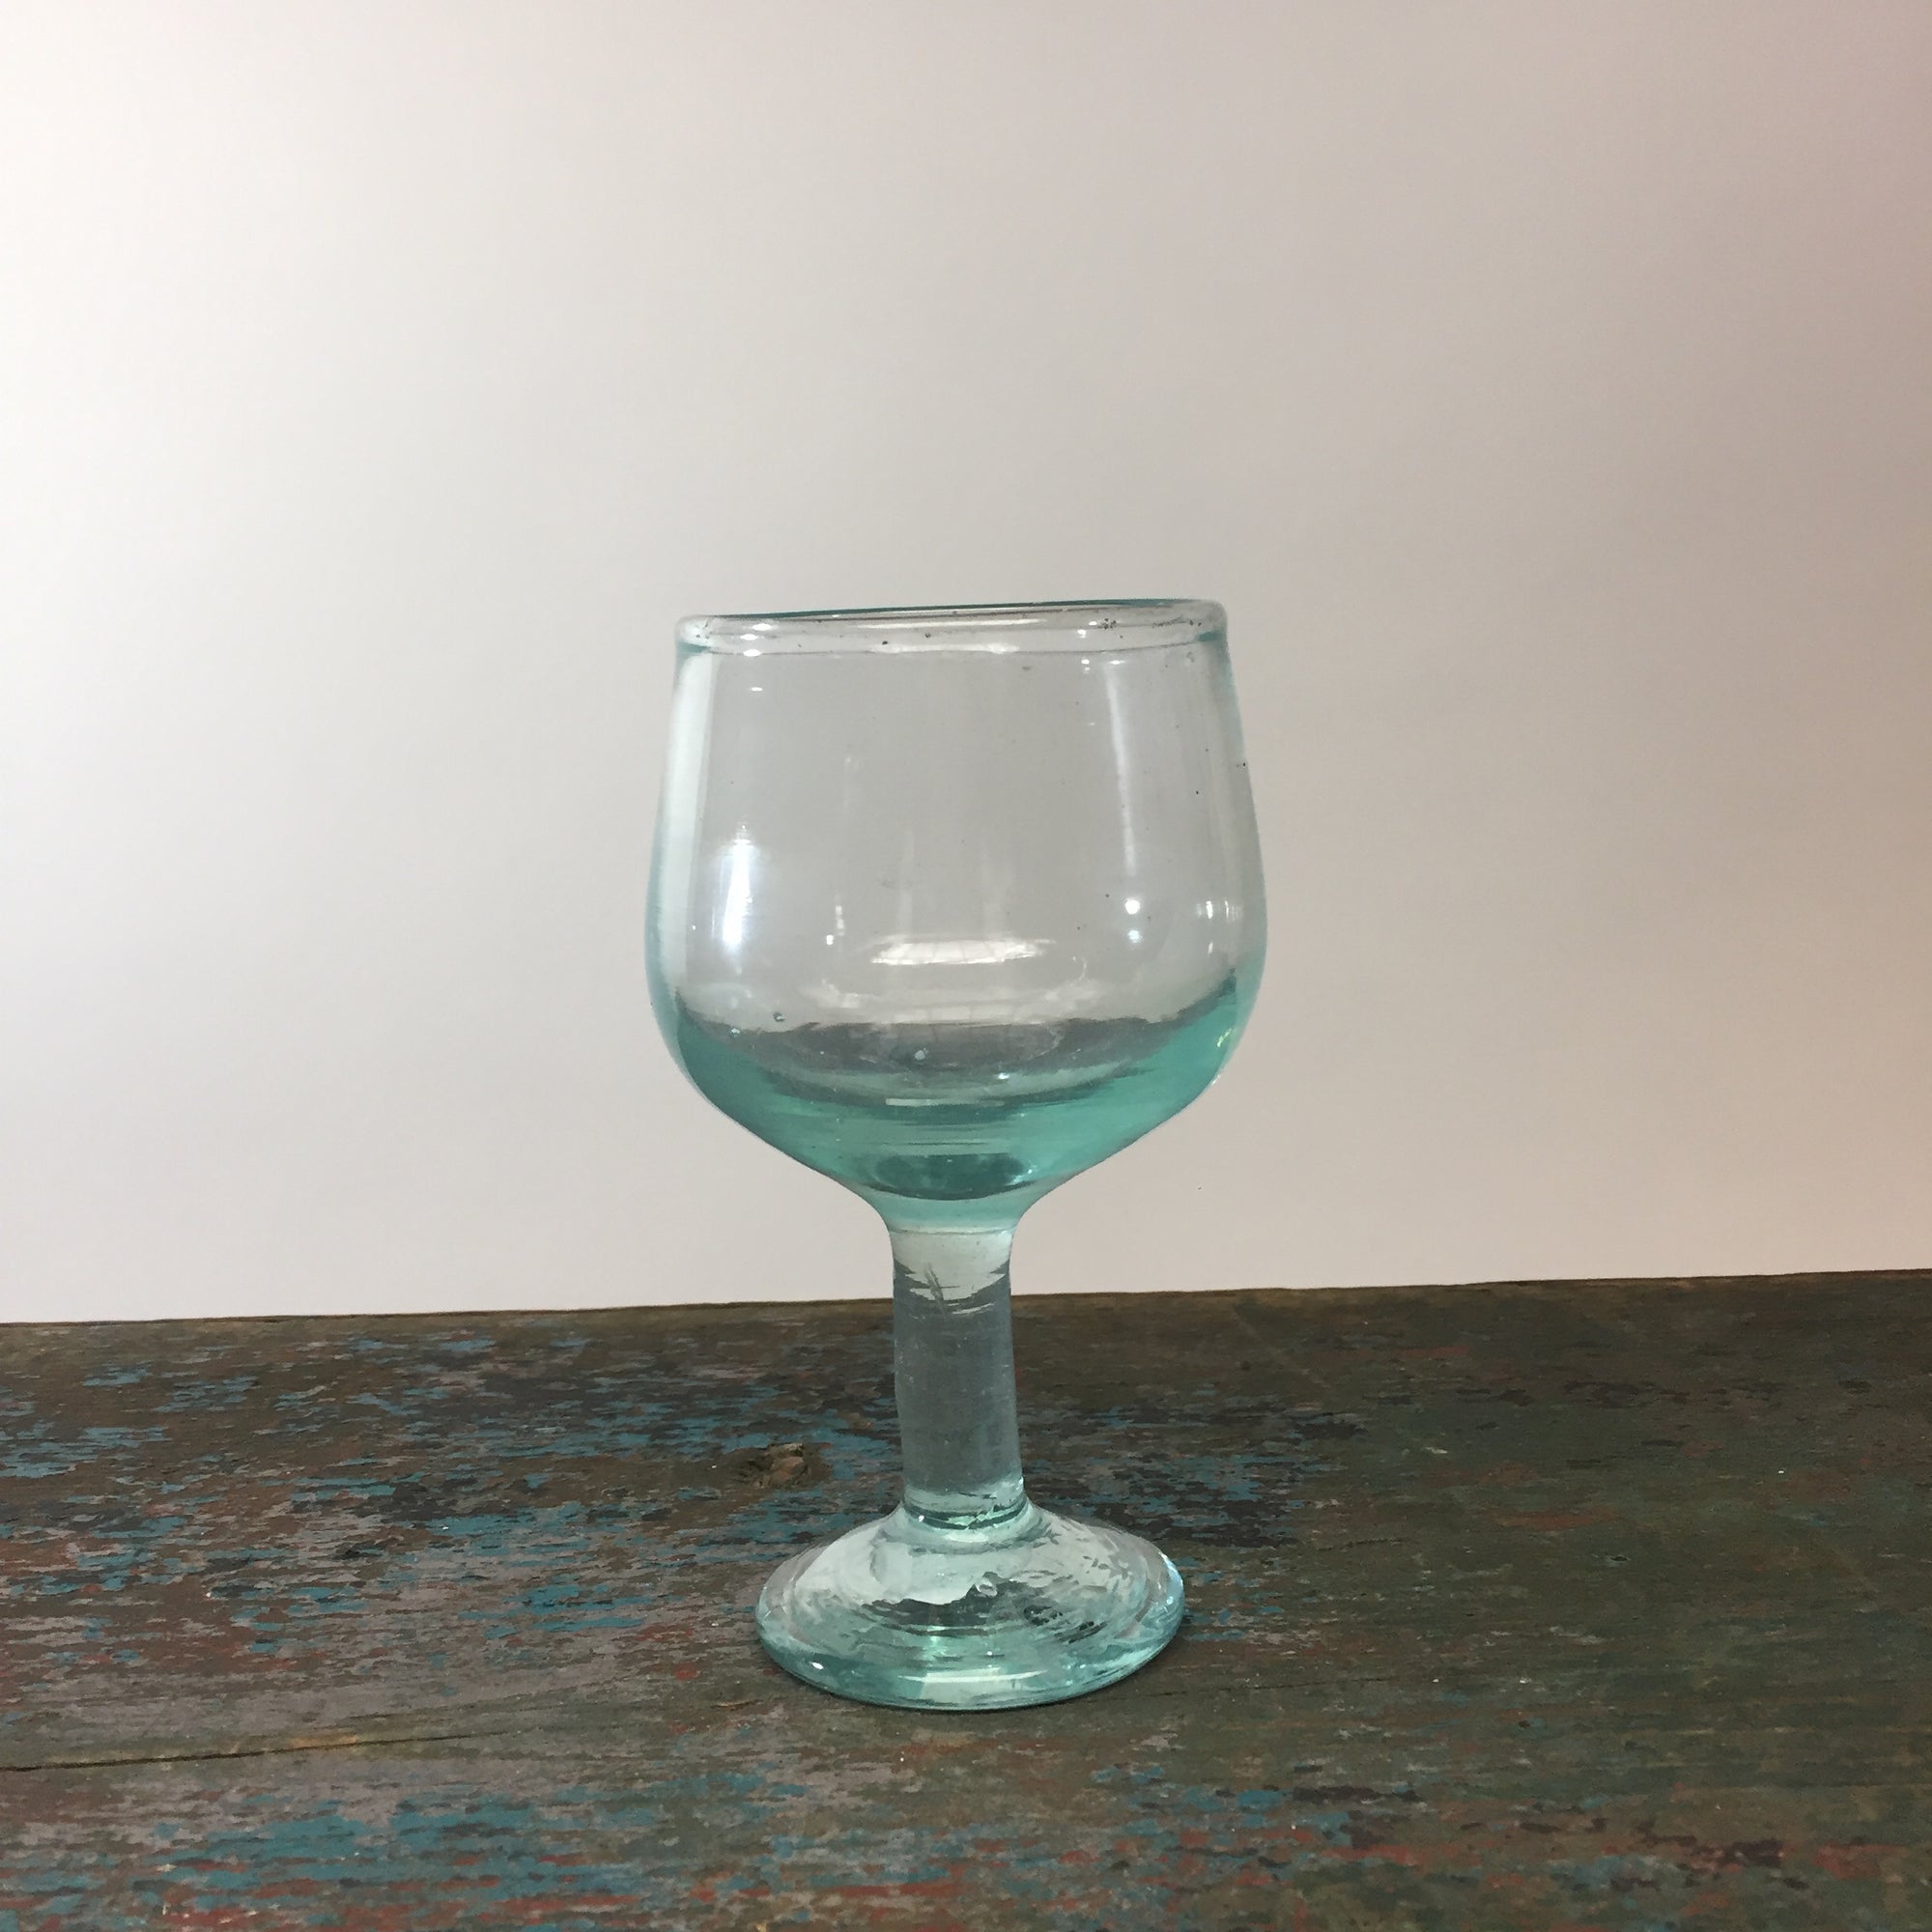 Martini - La Soufflerie - Hand blown from recycled glass